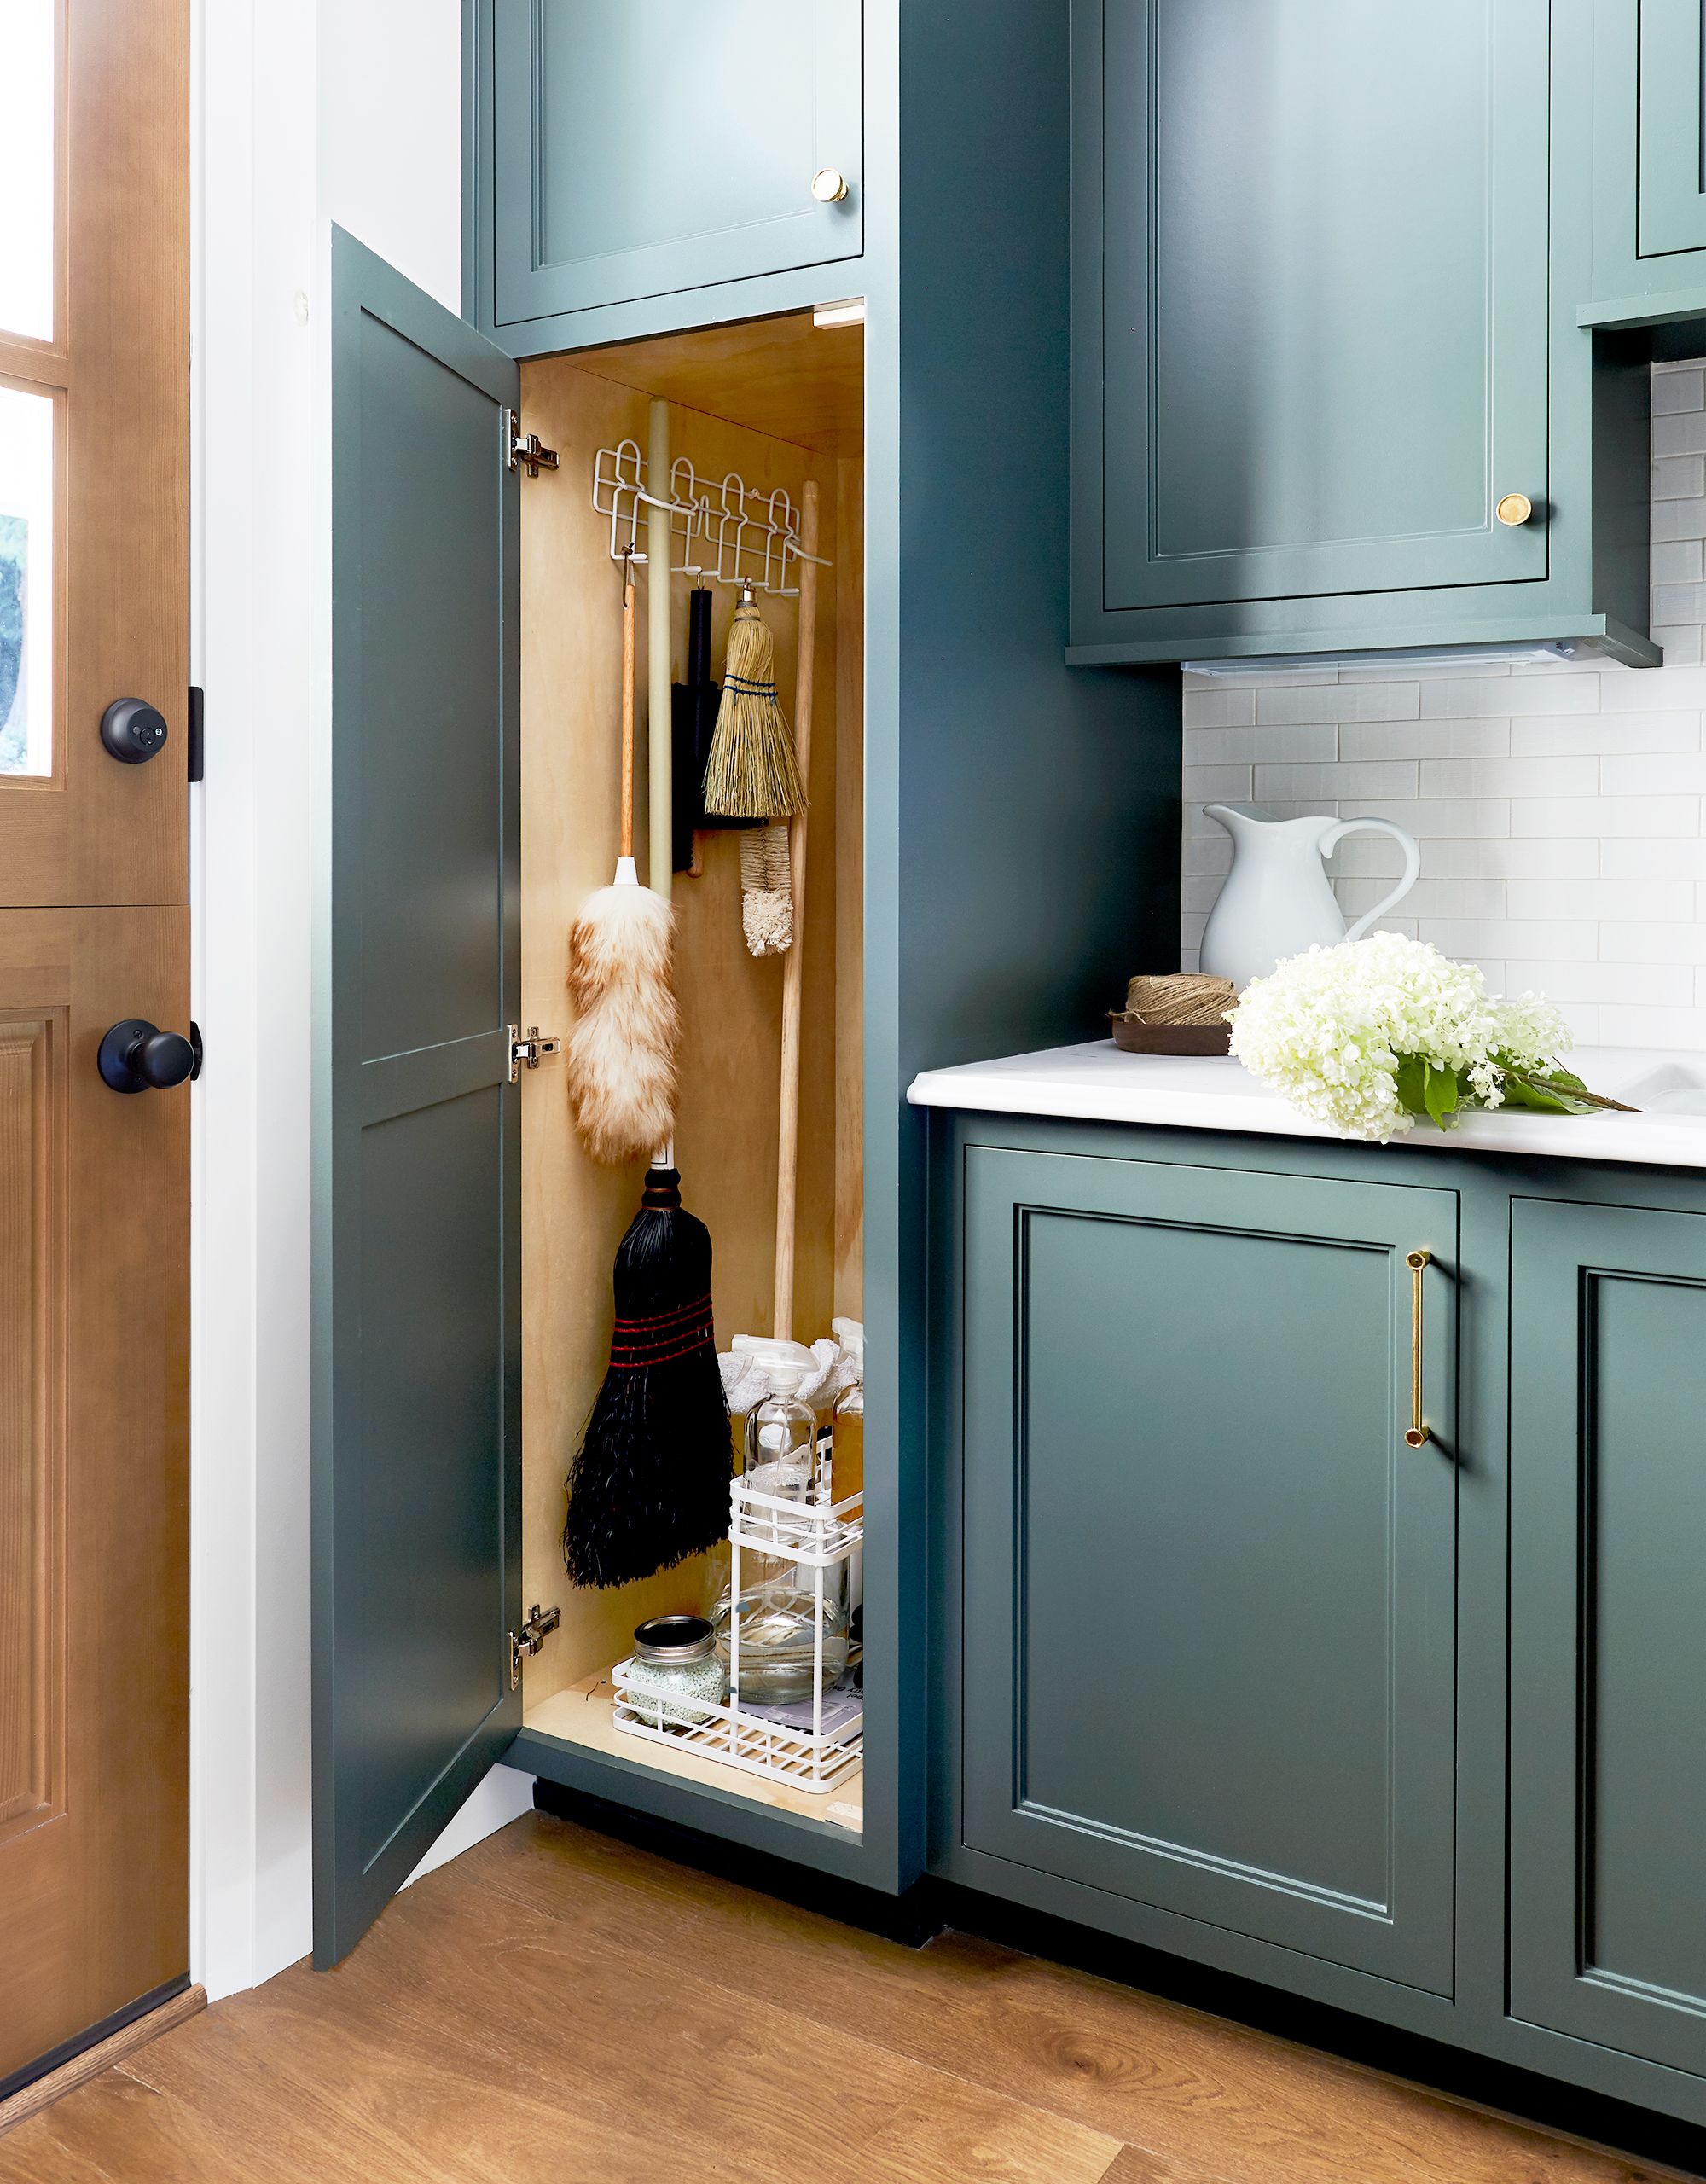 21 Kitchen Cabinet Organization Ideas You Need to Try